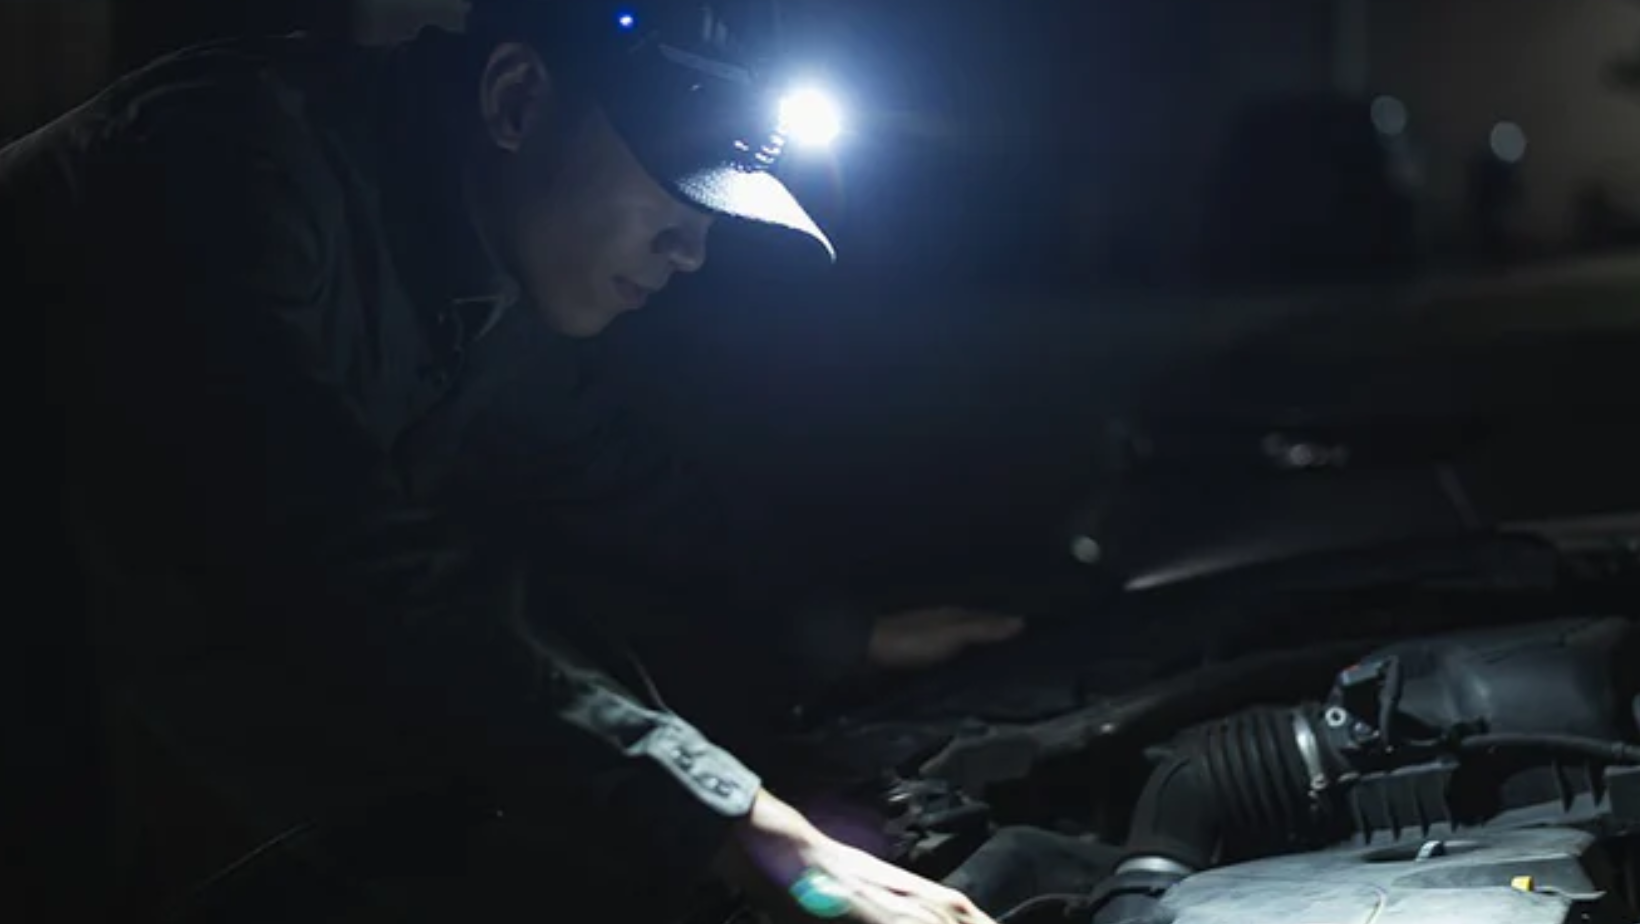 What’s The Best Headlamp For Work? Exploring the Wuben E7 Headlamp